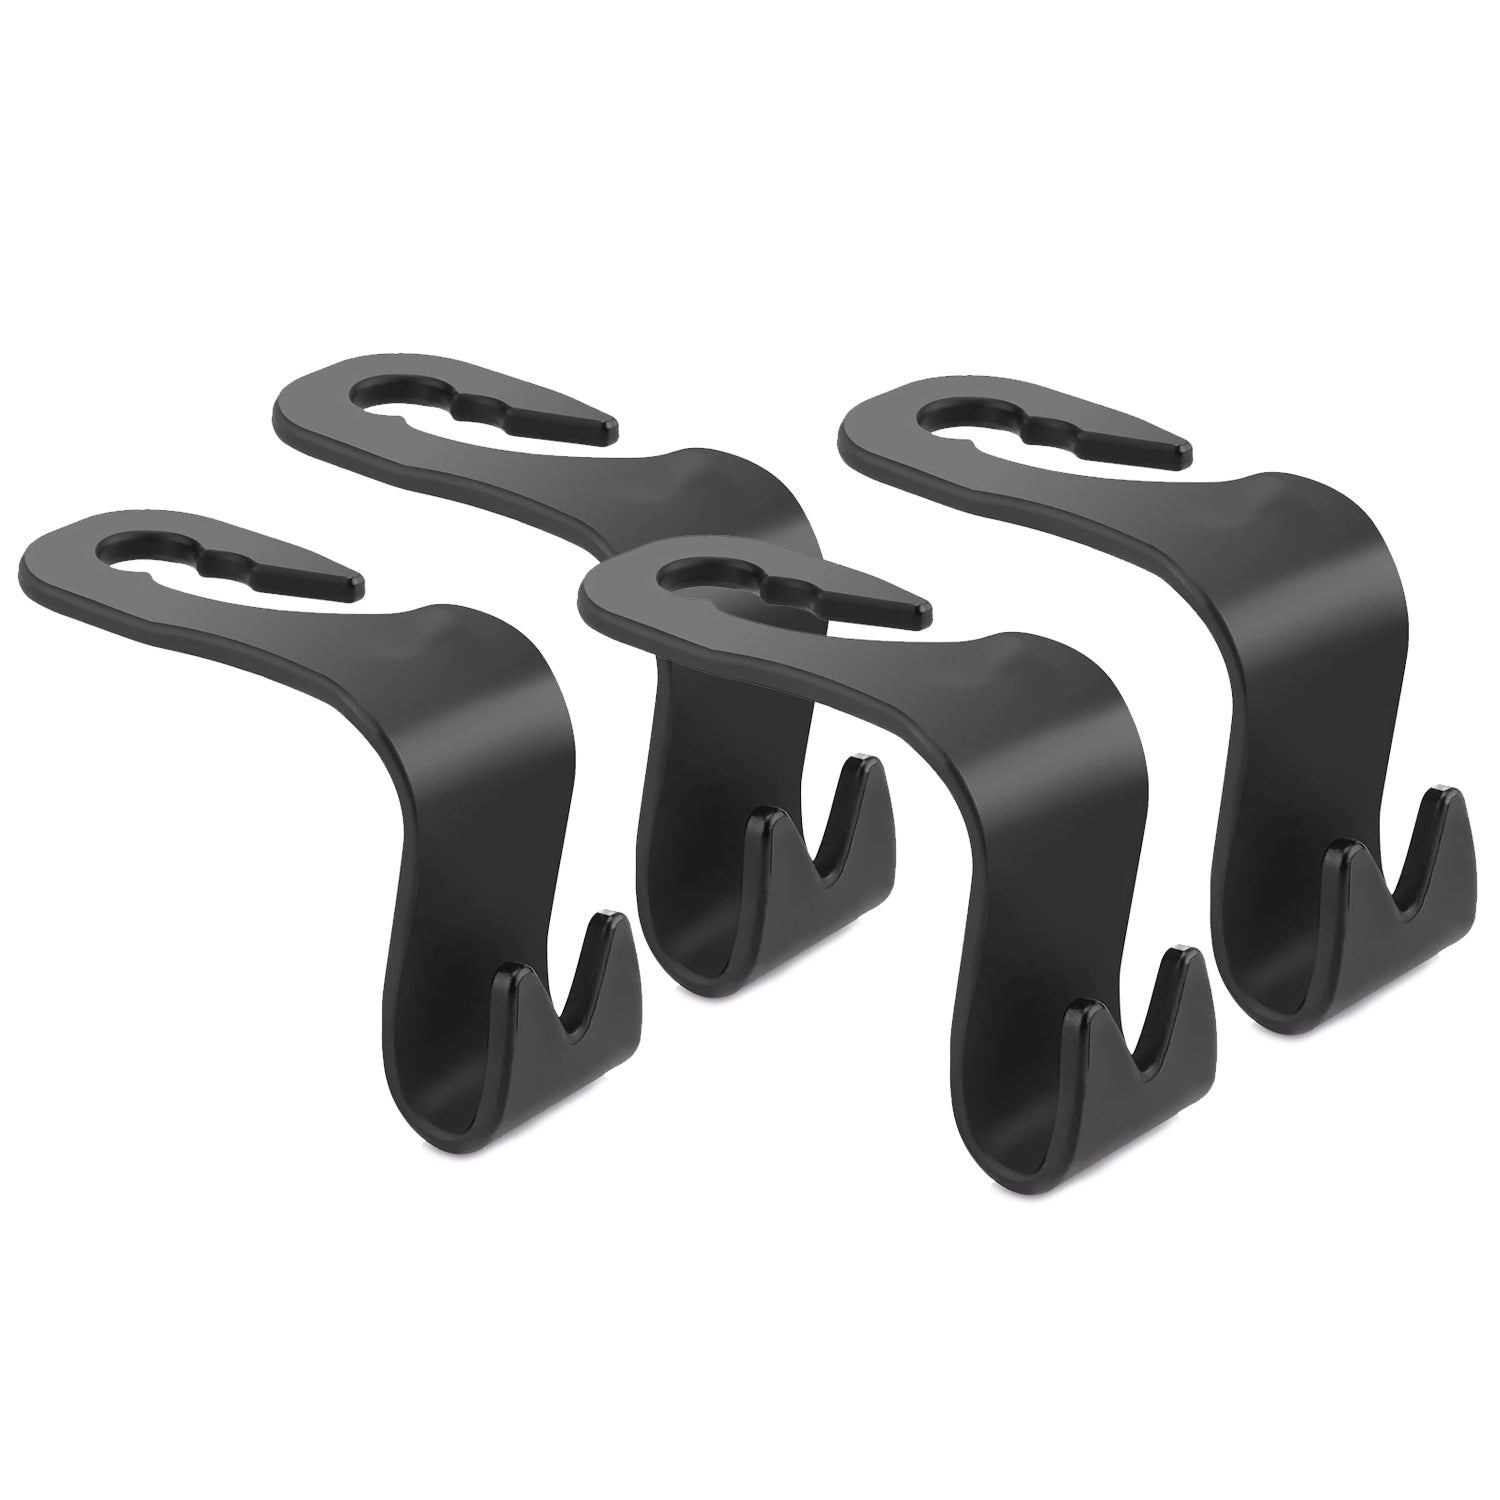 9005 Car Backrest Hanger and backrest stand for giving support and stance to drivers. 